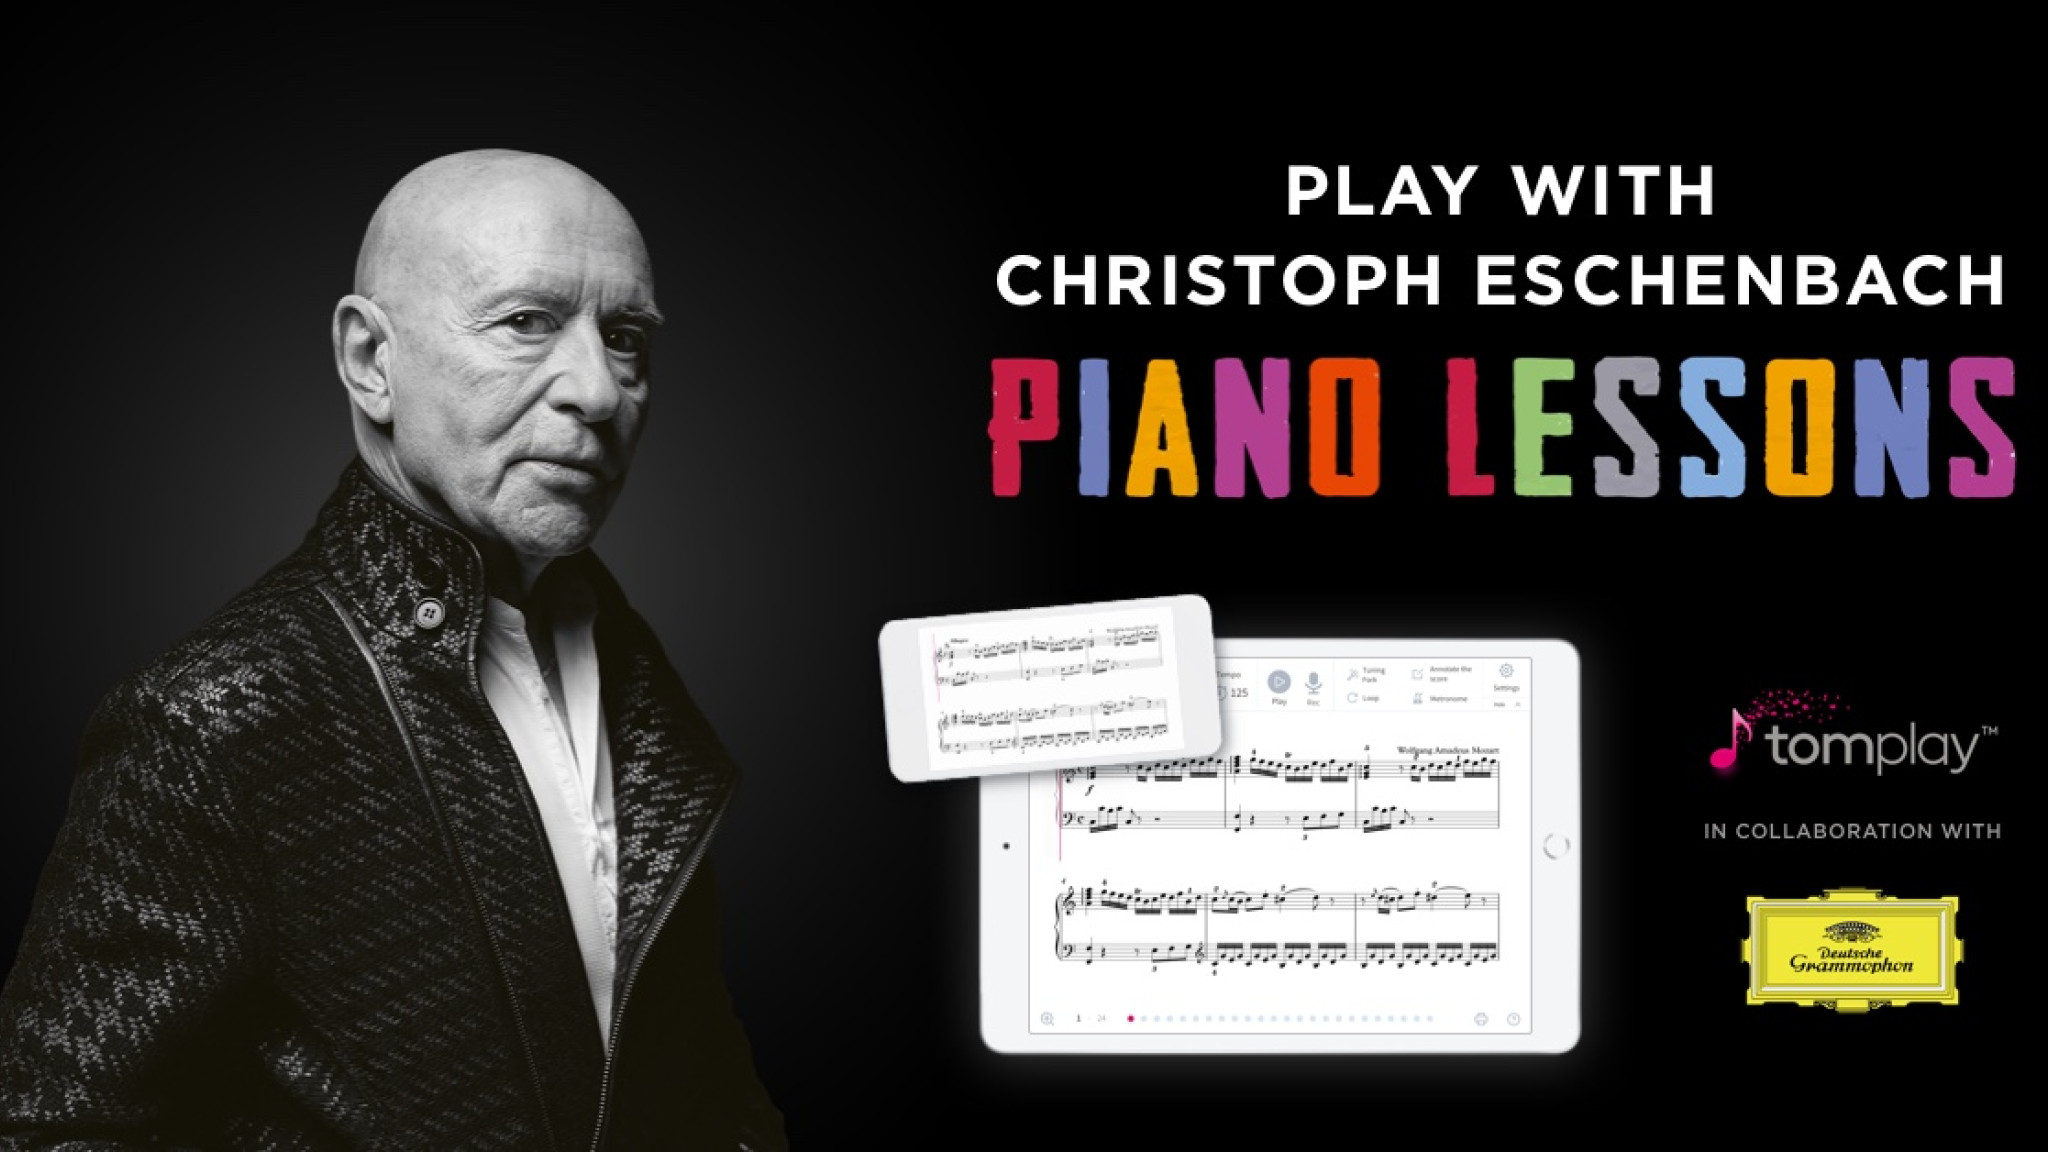 Play with Christoph Eschenbach in Collaboration with Tomplay 